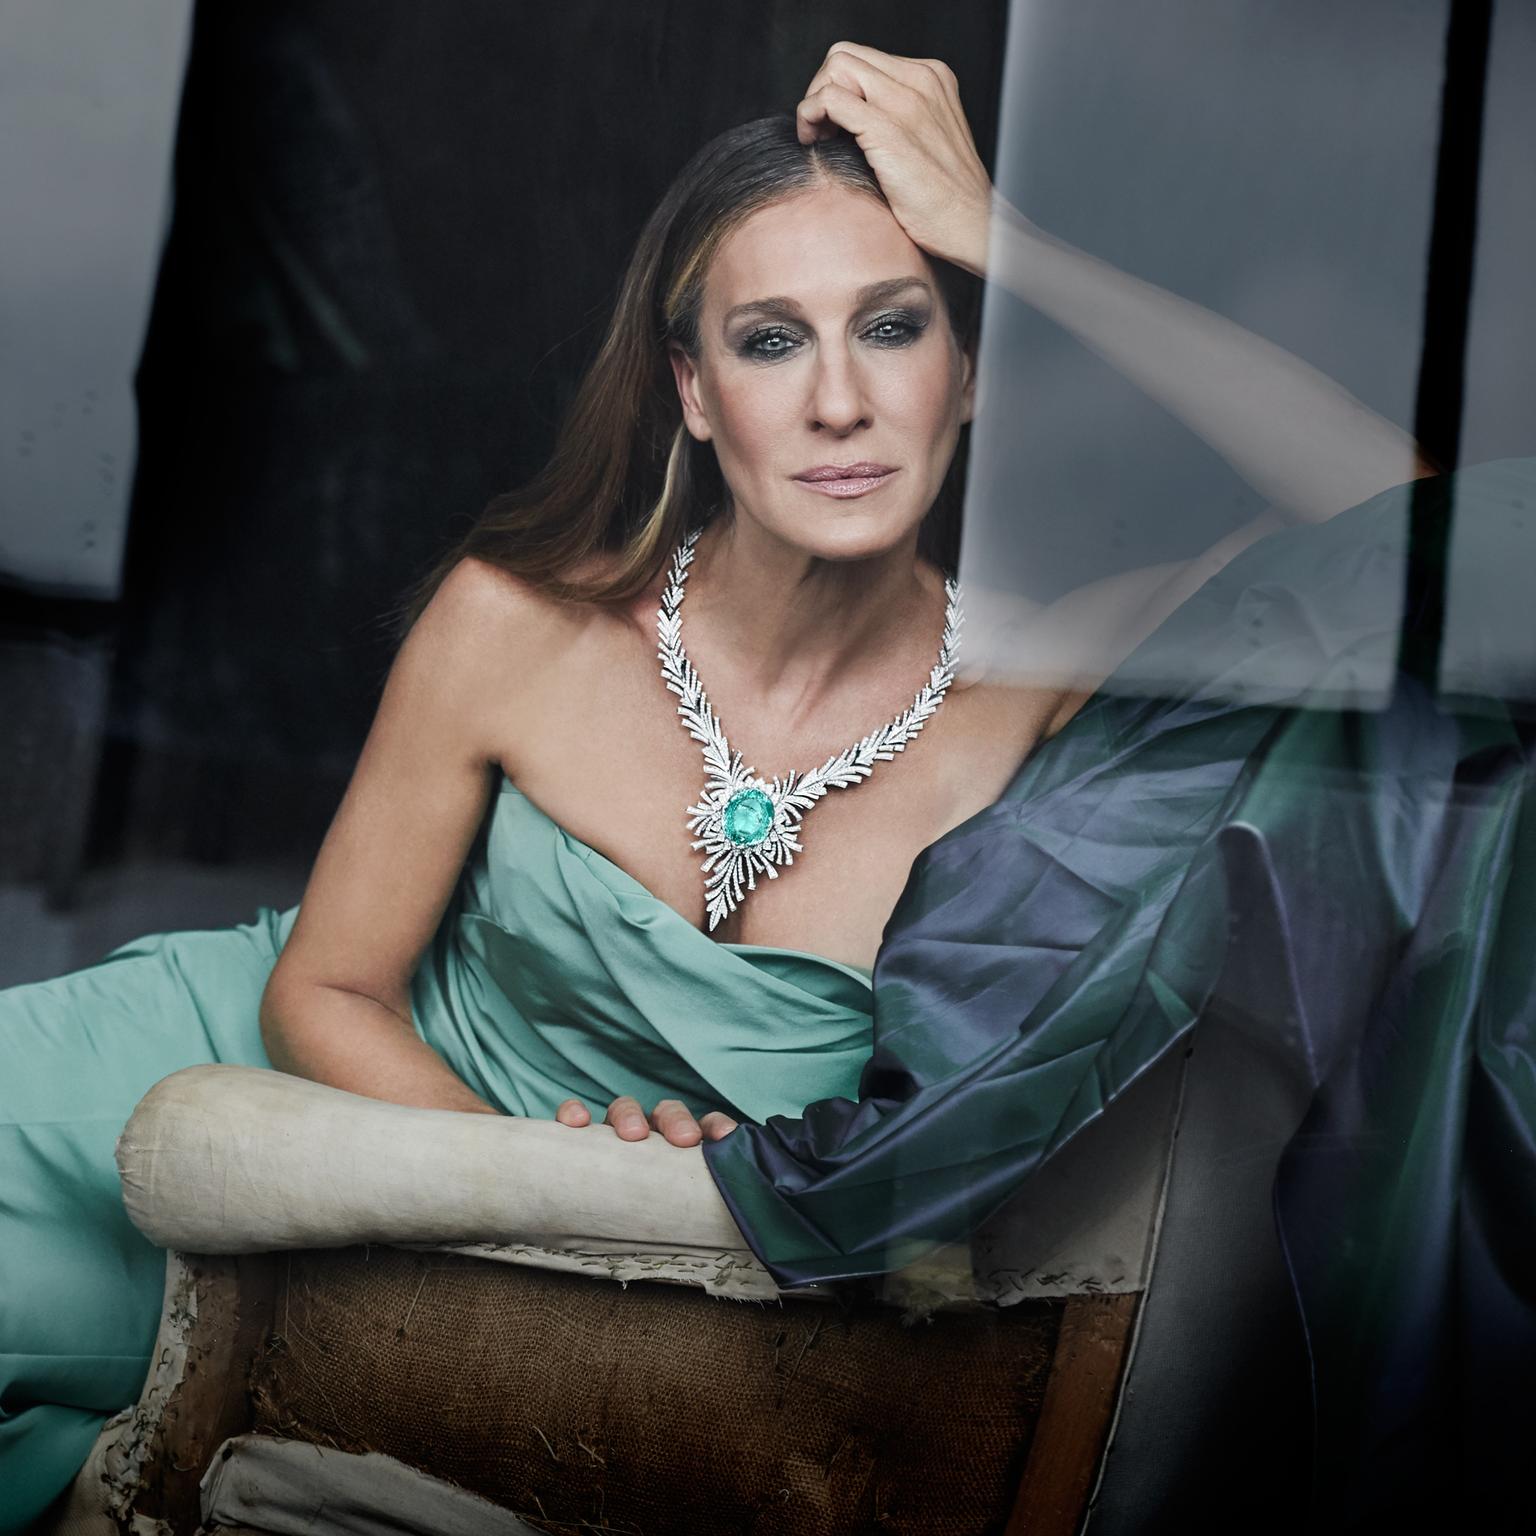 Sarah Jessica Parker wearing one of Kat Florence's largest creations to date, a 98.50 carat Paraiba tourmaline necklace